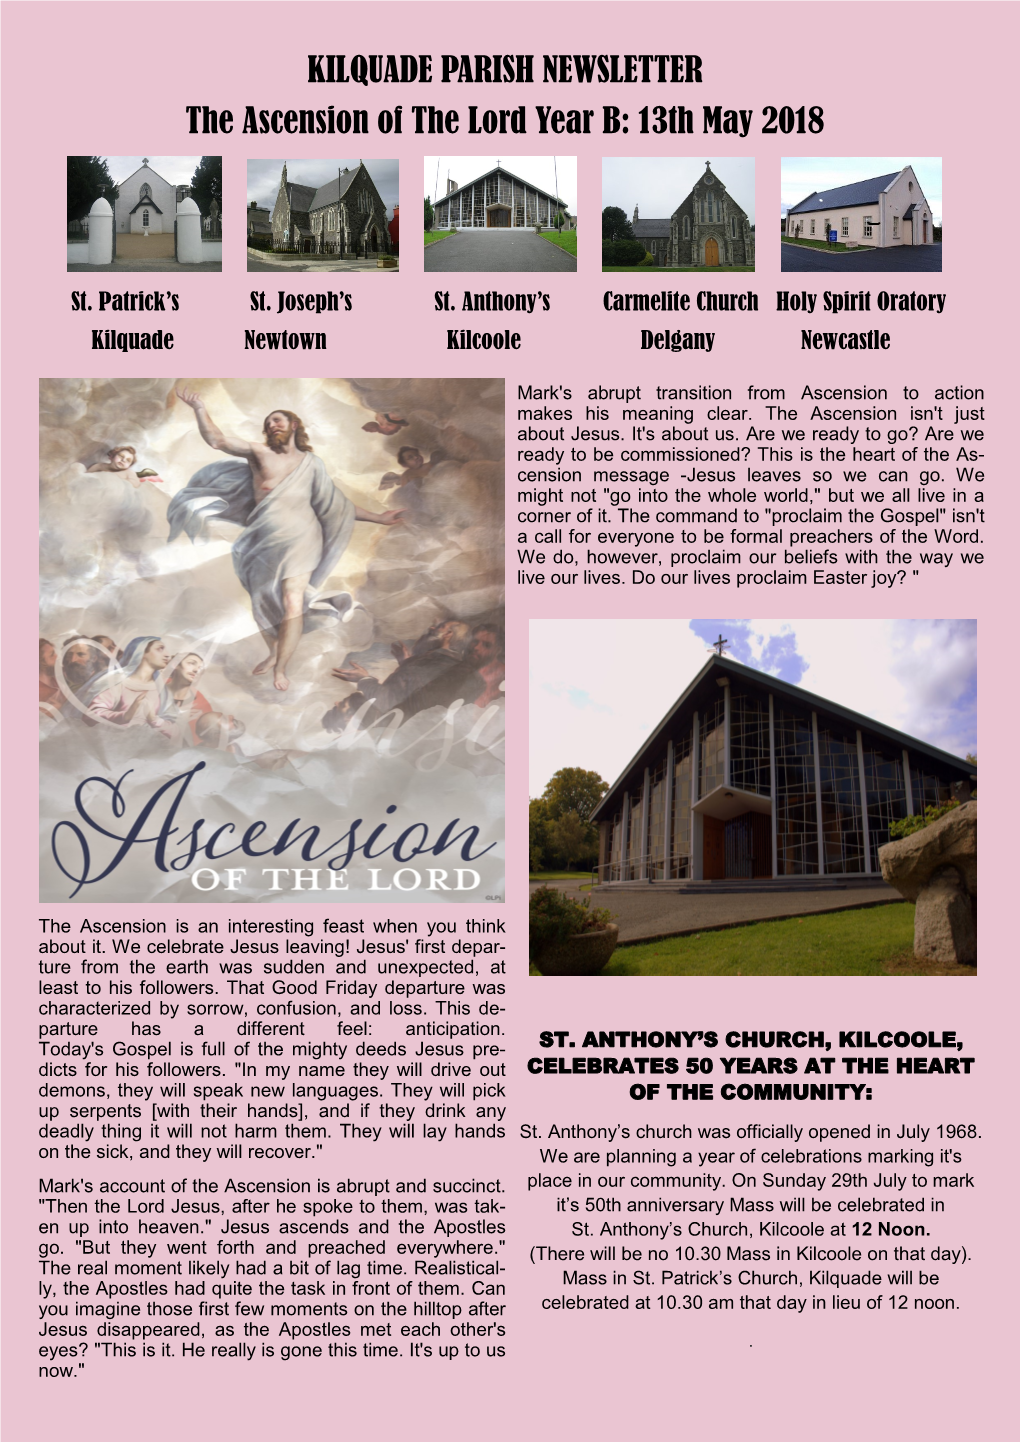 KILQUADE PARISH NEWSLETTER the Ascension of the Lord Year B